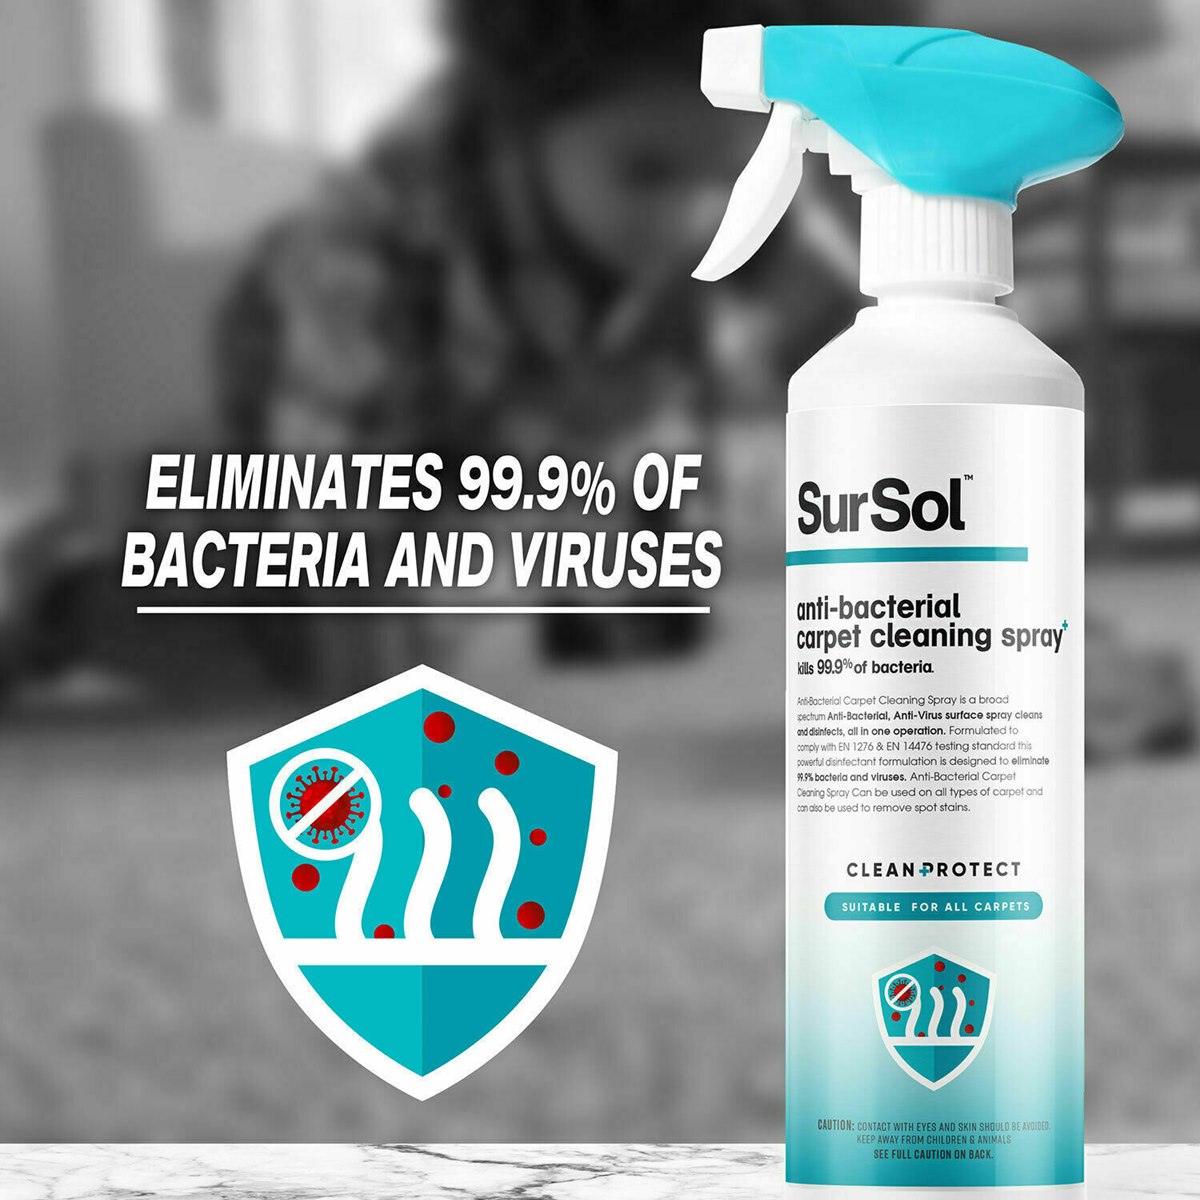 Anti-Bacterial Carpet Cleaning Spray